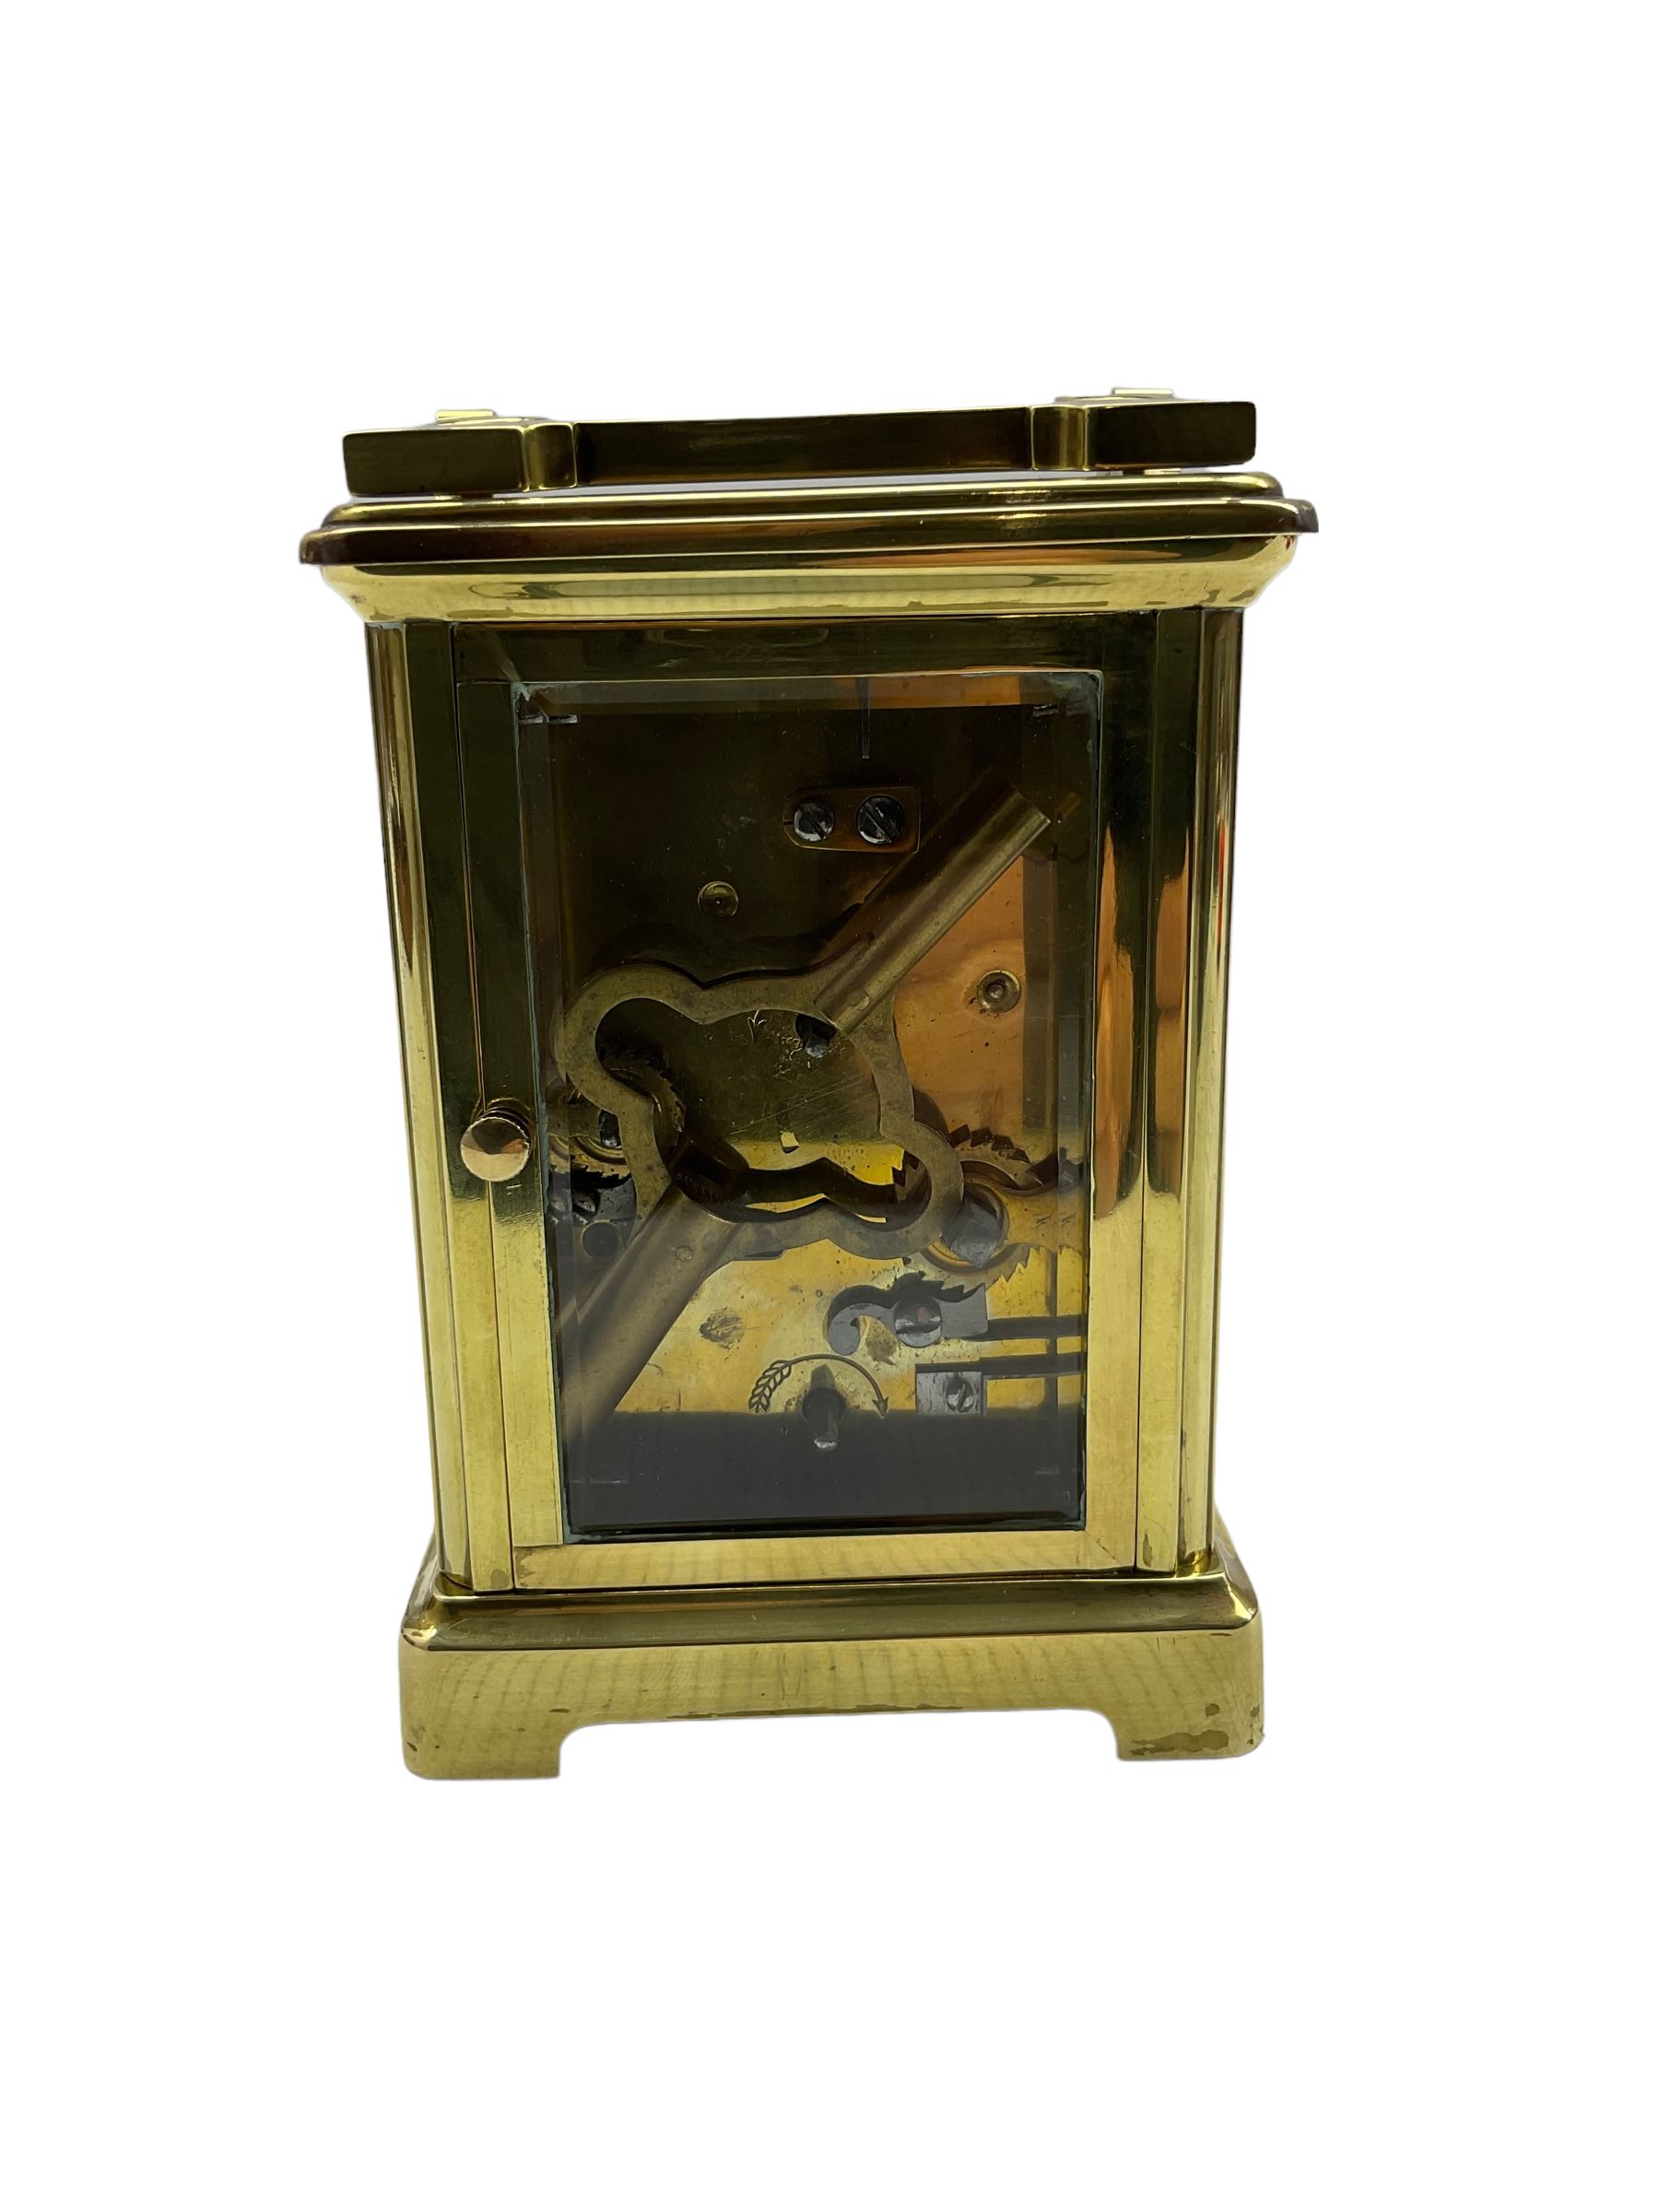 French - 19th century 8-day brass cased carriage clock - Image 4 of 4